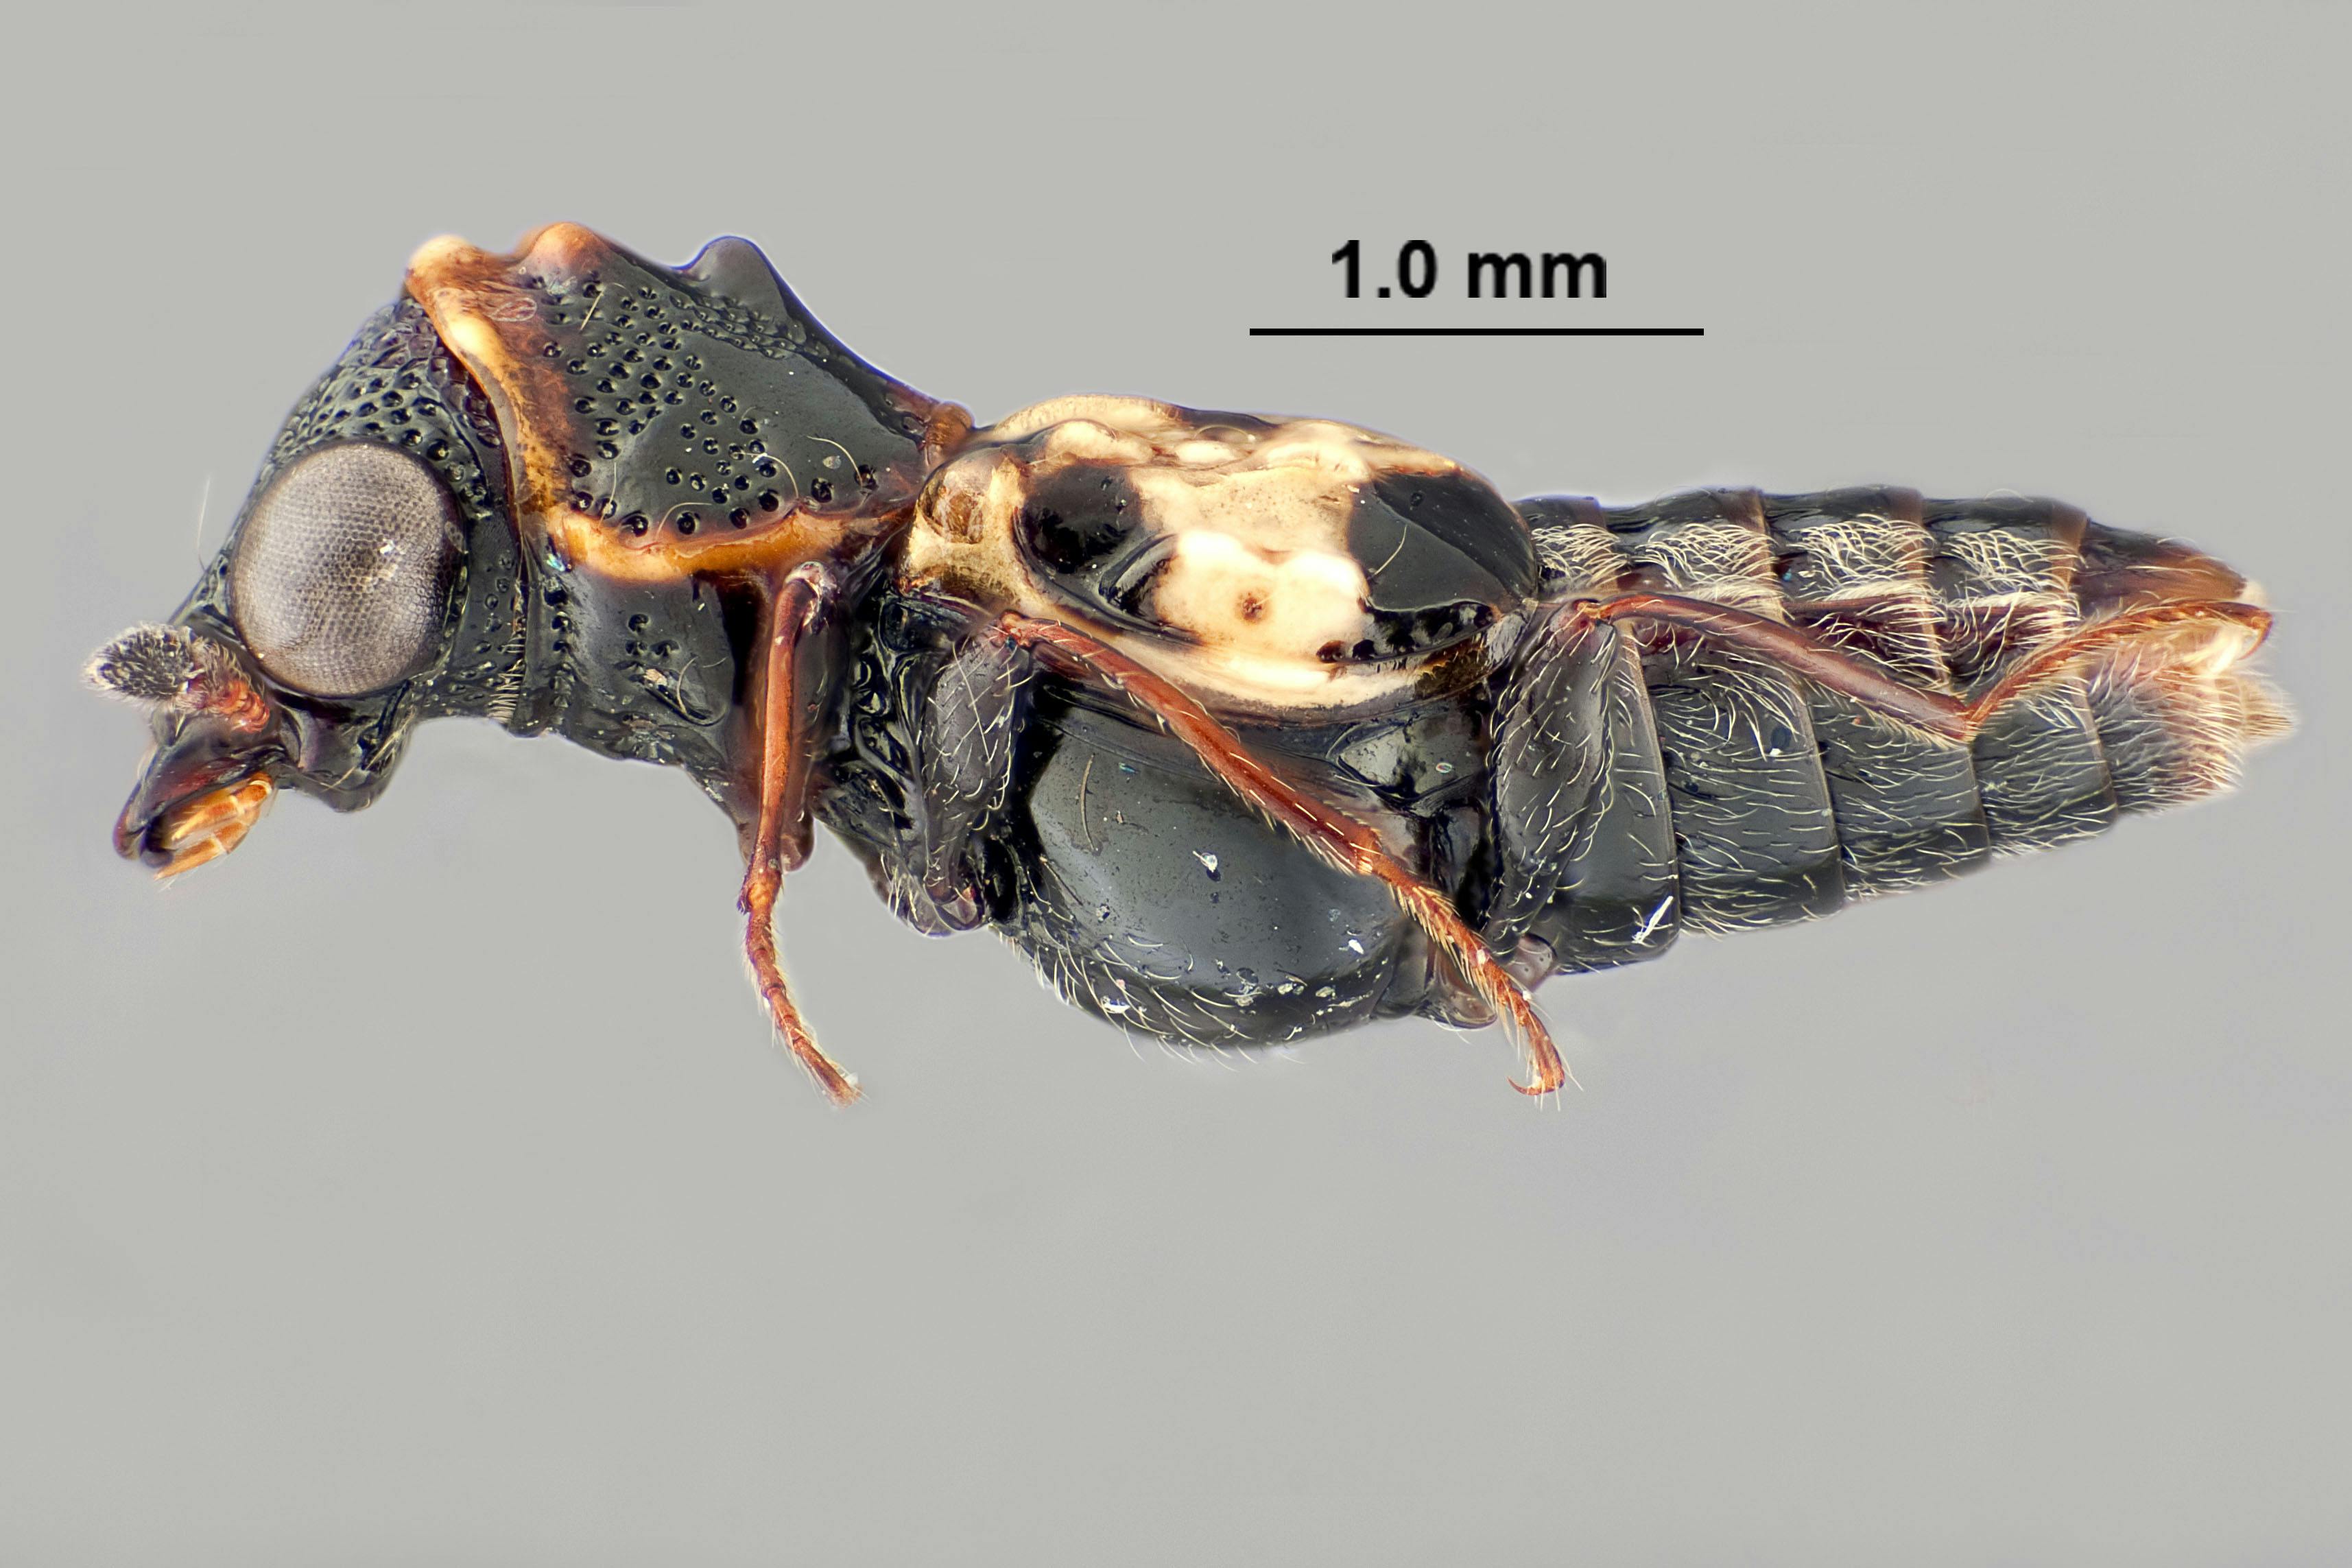 A very close-up, high resolution photograph of a beetle that has a mostly black body with orange-brown legs and yellow hairs and the backend of the body. Its eyes appear very large and globular.